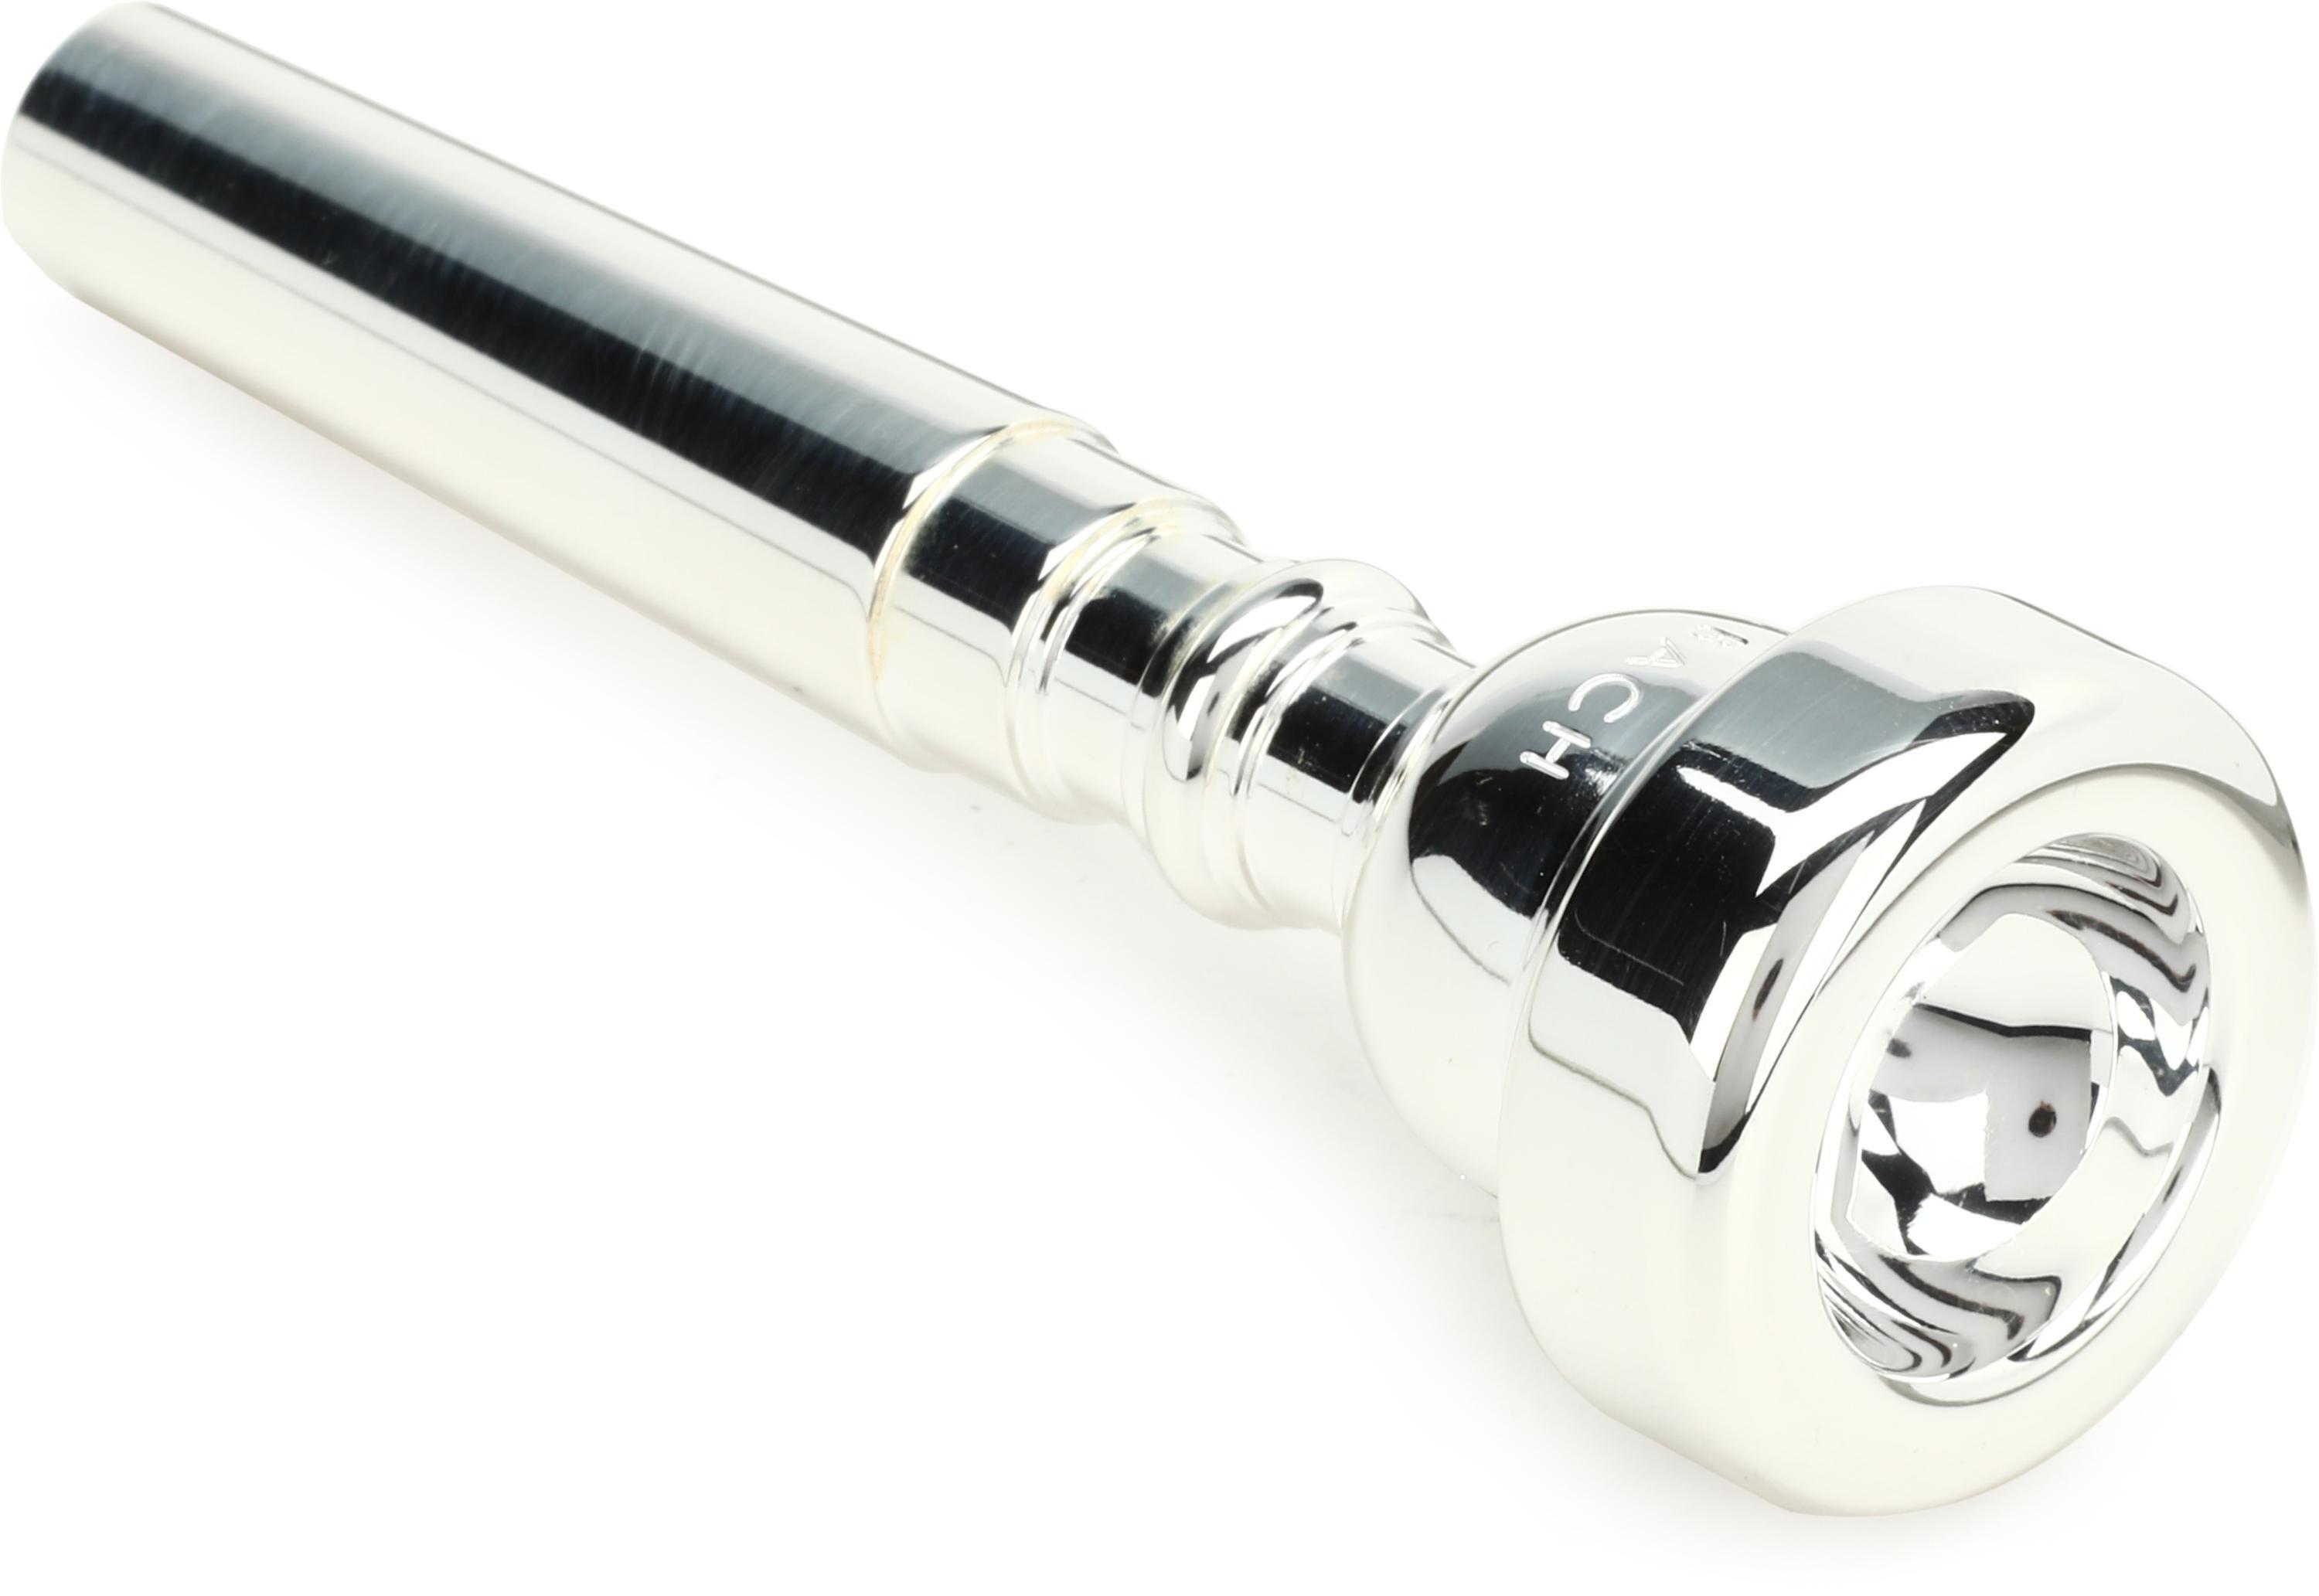 Bach S651 Symphonic Series Trumpet Mouthpiece - 1.5C with